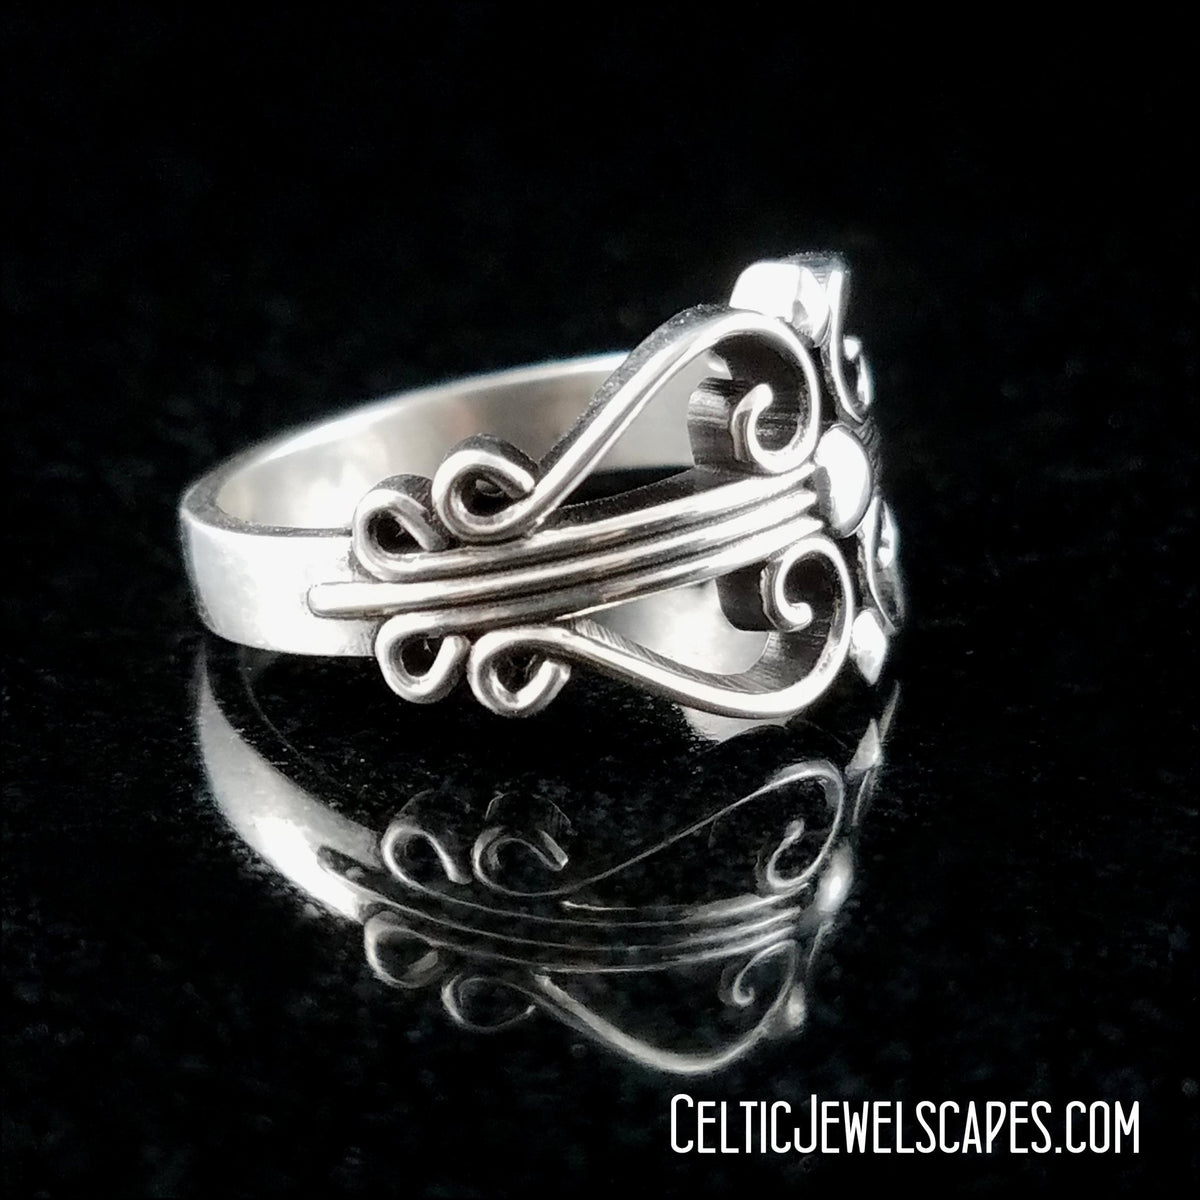 RIOS - Starting at $179 - Celtic Jewelscapes